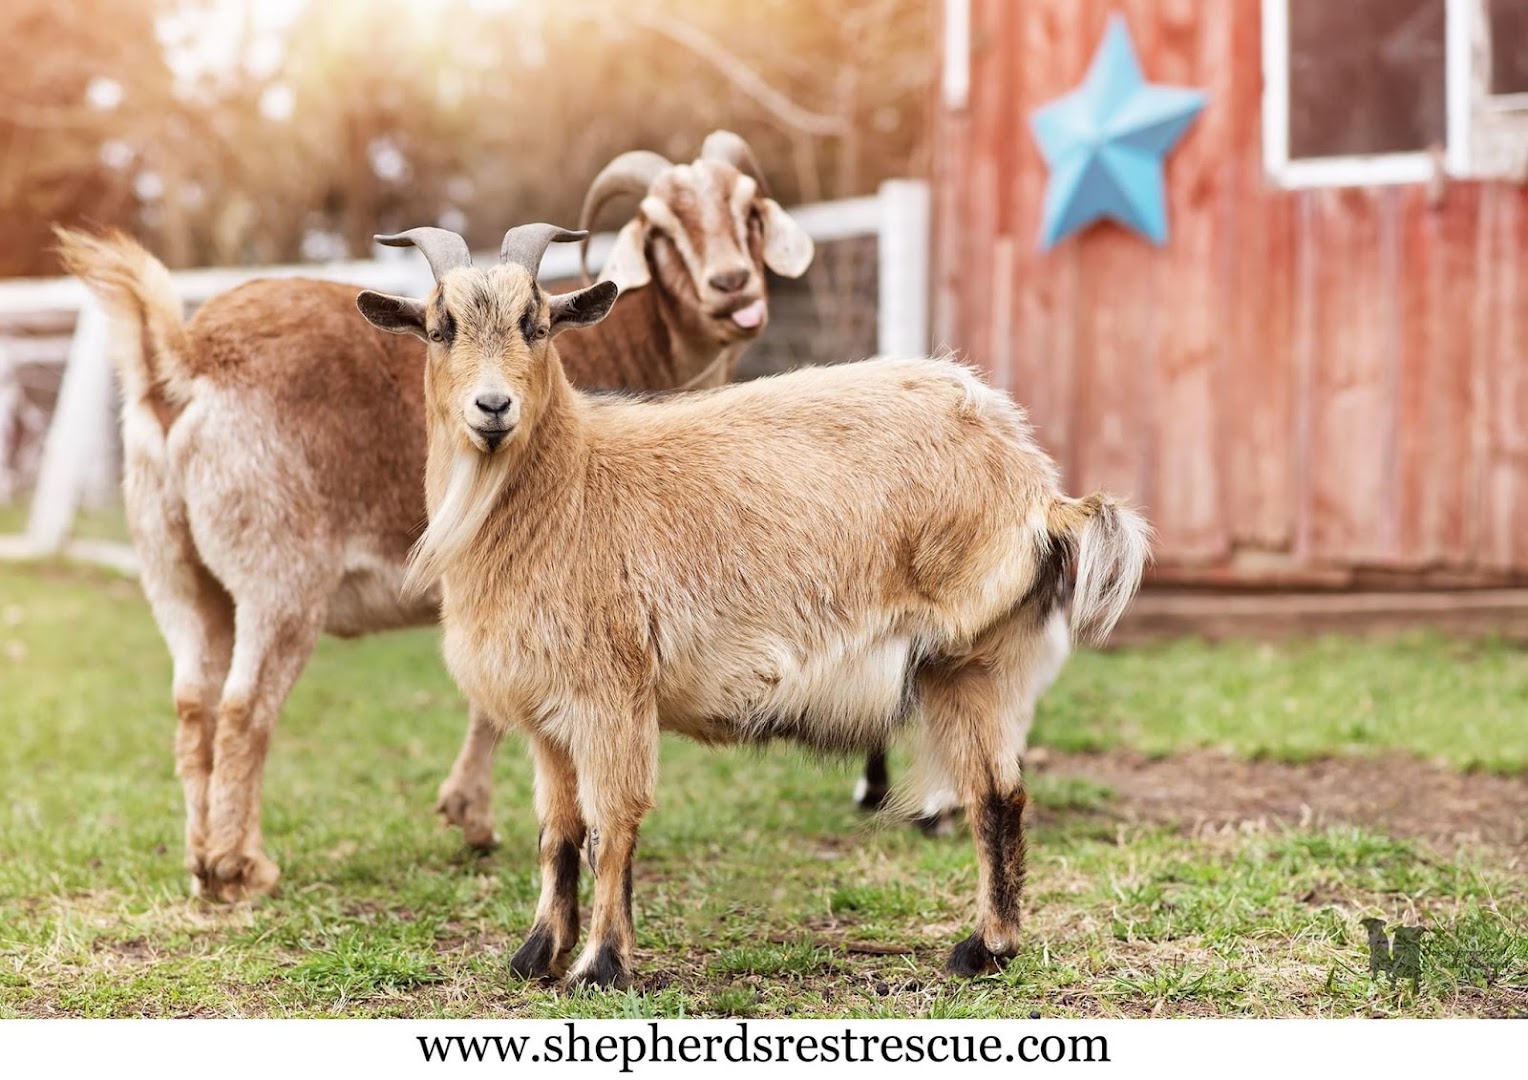 Shepherd's Rest Goat and Sheep Rescue